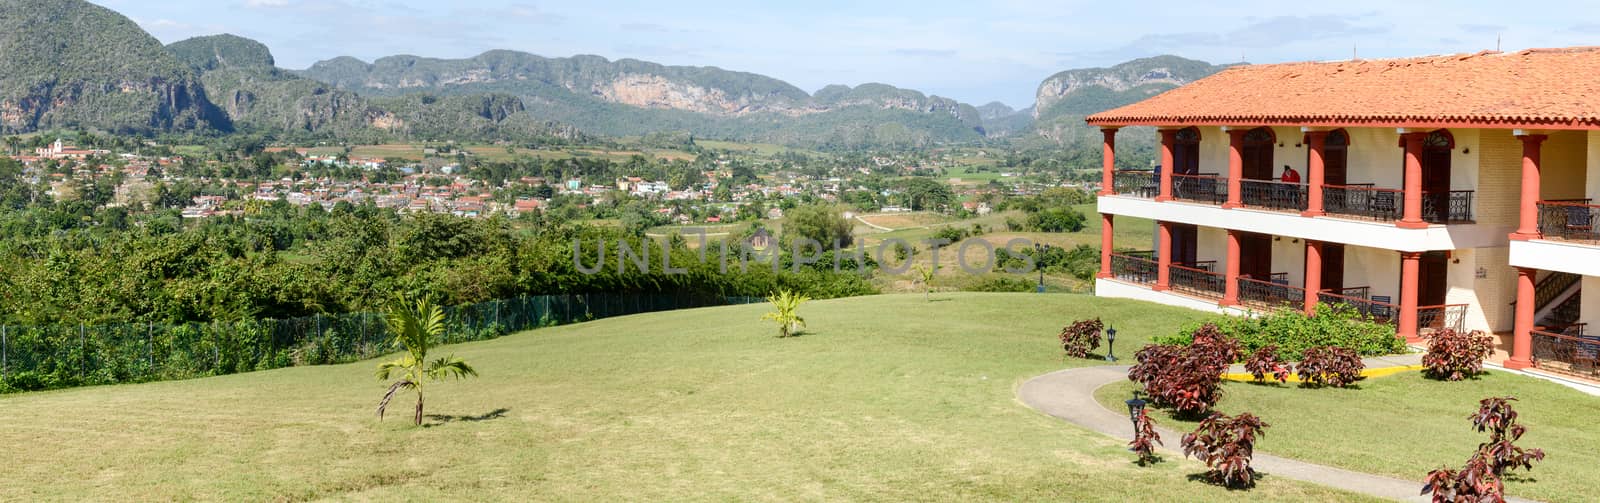 Vinales, Cuba - 25 january 2016: Town and valley of Vinales view from hotel La Elmira on Cuba